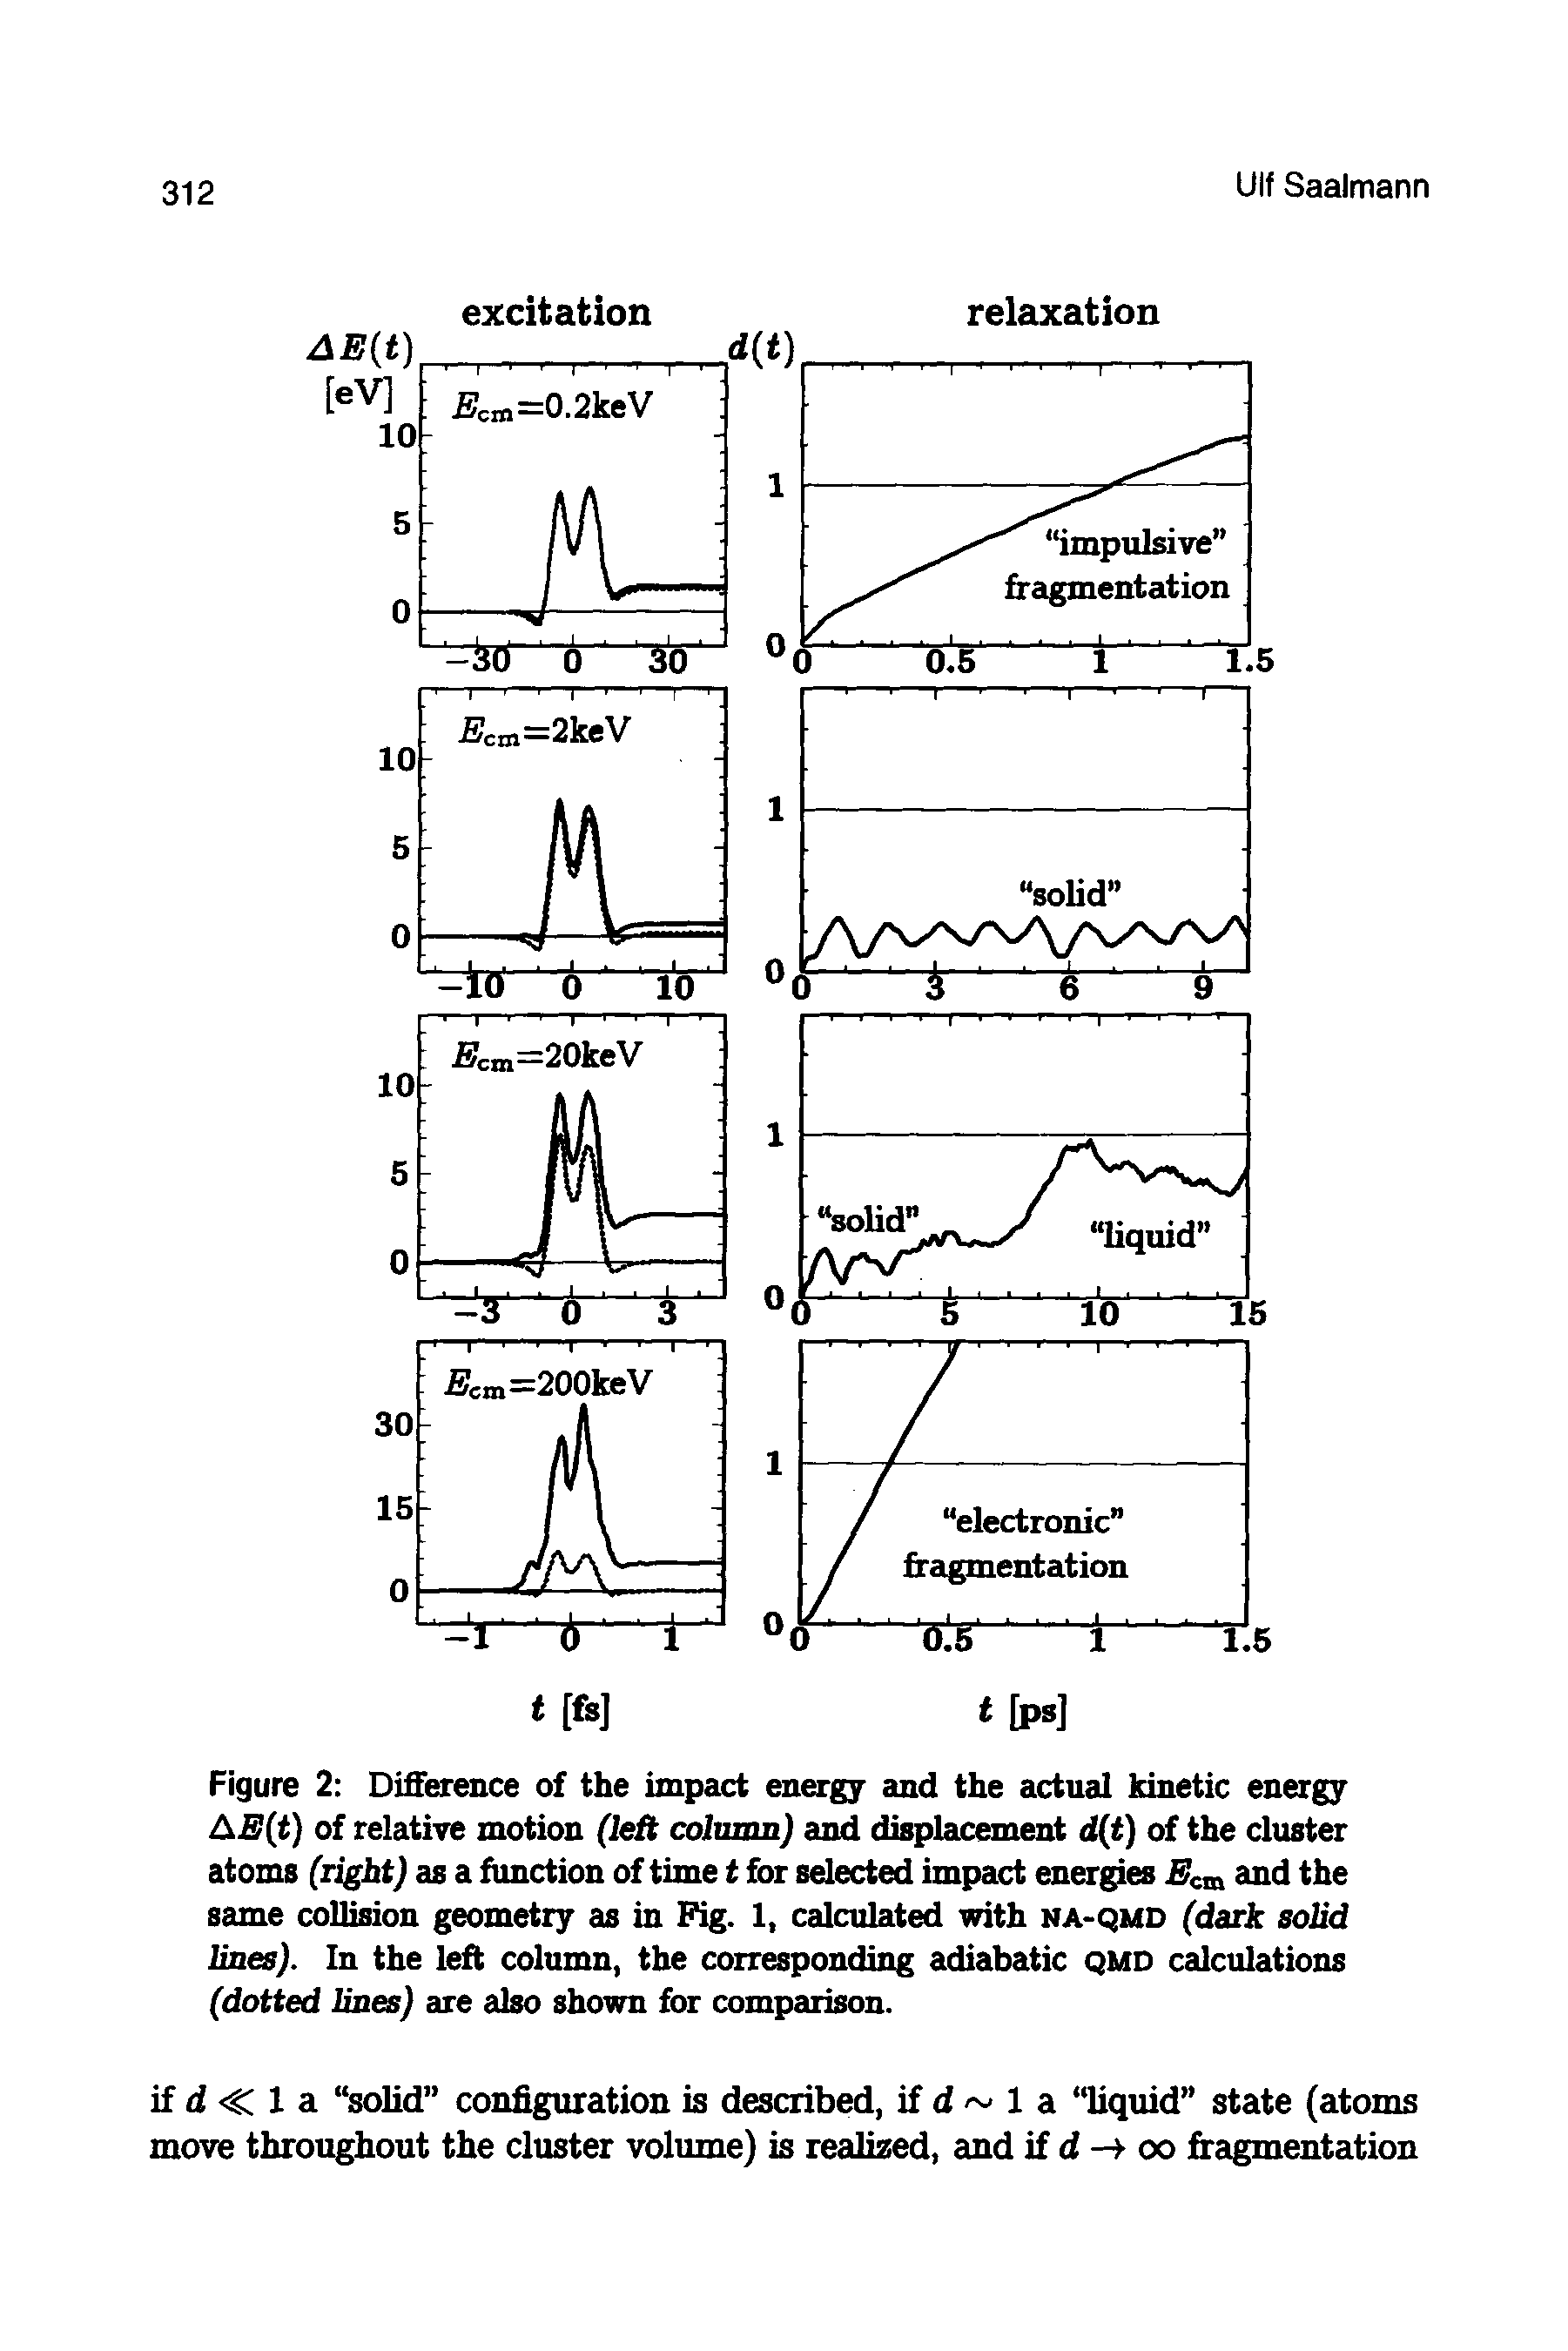 Figure 2 Difference of the impact energy and the actual kinetic energy AE(t) of relative motion (left column) and displacement d(t) of the cluster atoms (right) as a function of time t for selected impact energies Ecm and the same collision geometry as in Fig. 1, calculated with na-qmd (dark solid lines). In the left column, the corresponding adiabatic qmd calculations (dotted lines) are also shown for comparison.